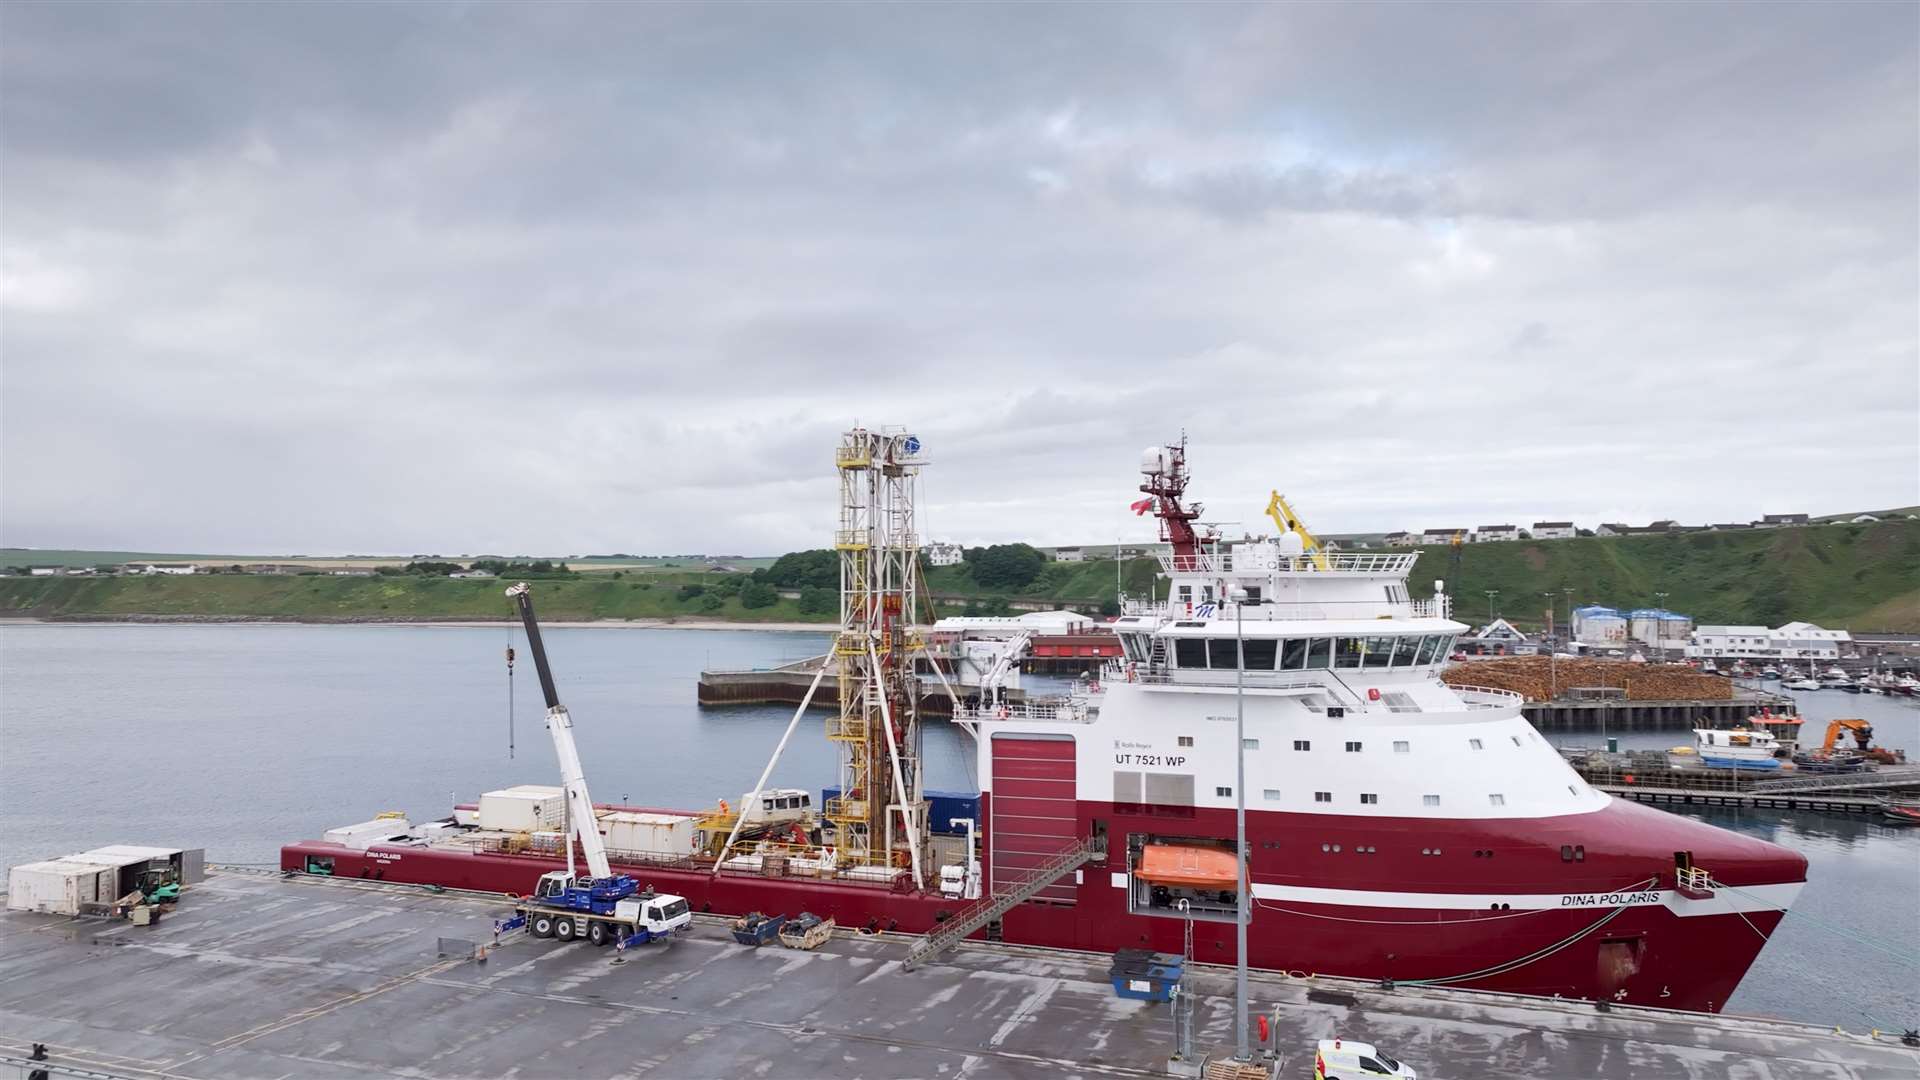 Offshore geotechnical work was carried out by Geoquip Marine using the Dina Polaris operating out of Scrabster.